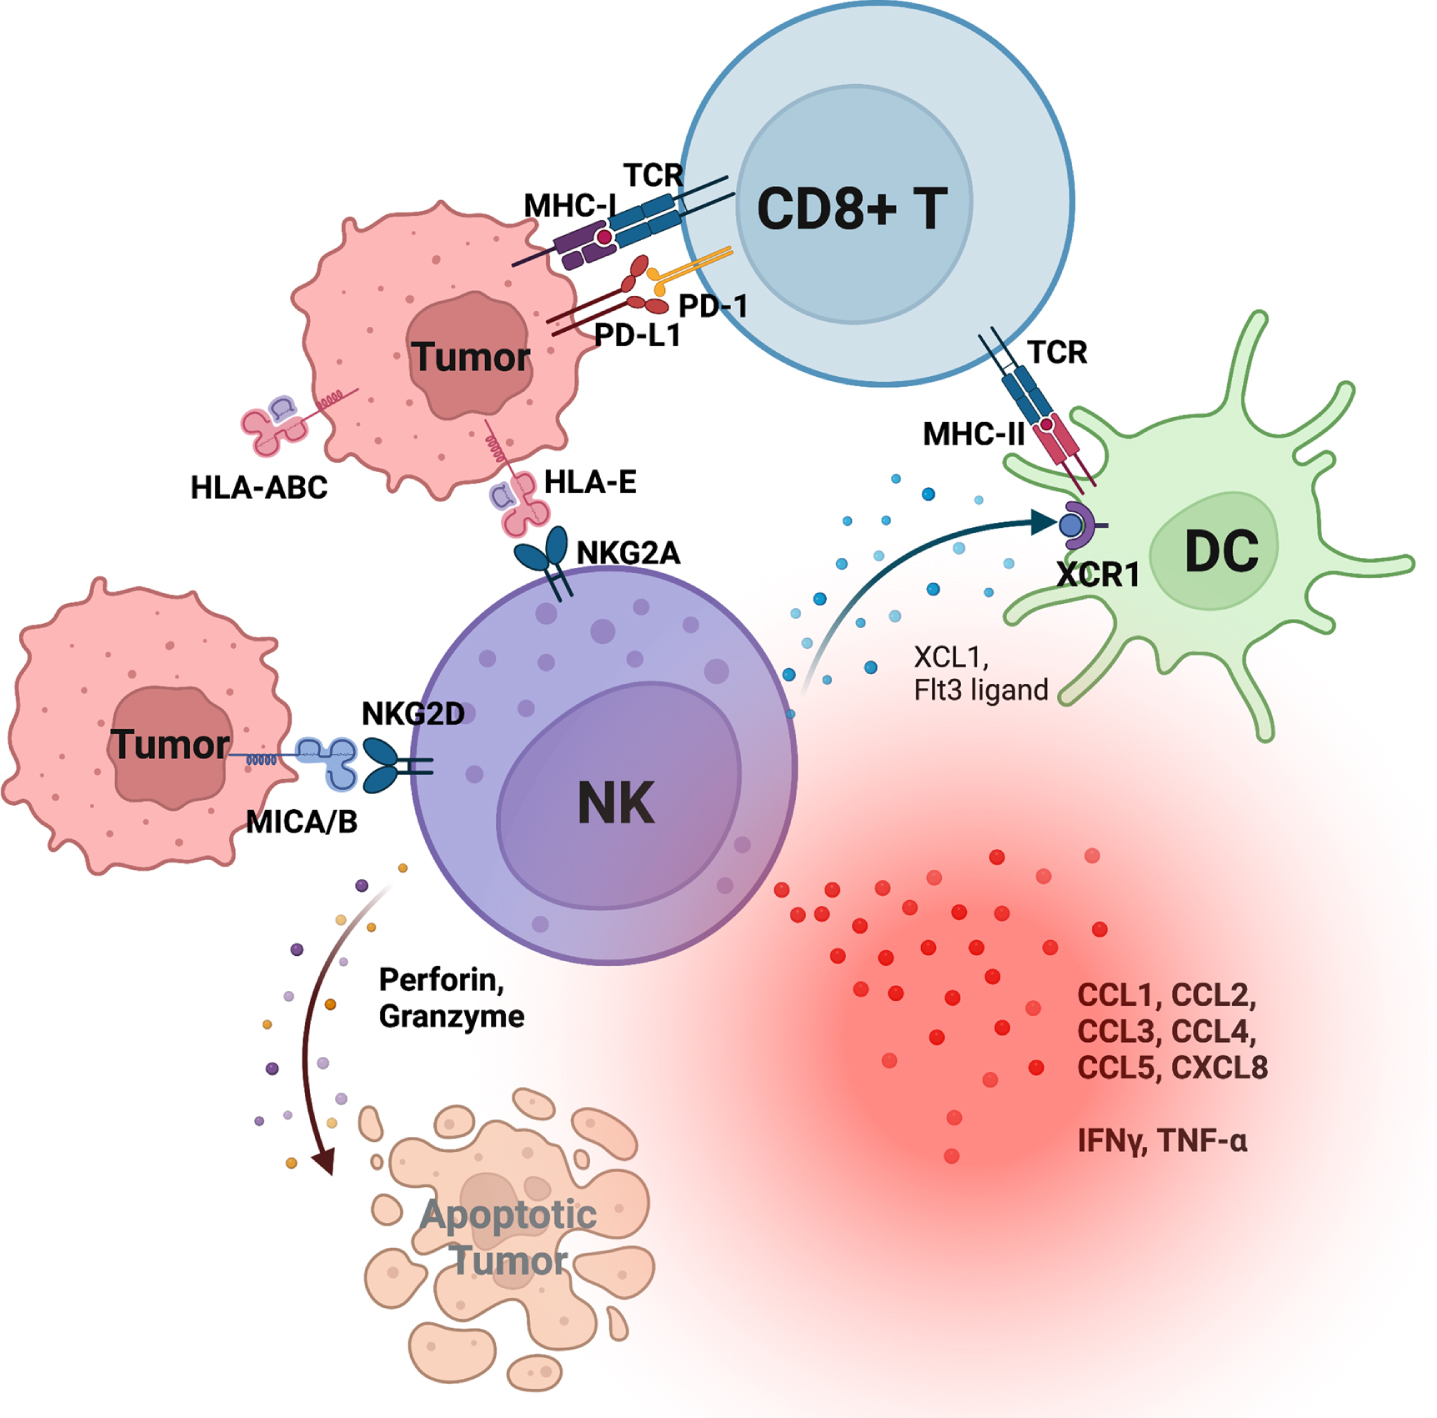 Schematic representation of tumor-infiltrating natural killer (NK) cells and their interactions with tumors and dendritic cells (DC). NK cells provide critical cytokines and chemokines that recruit and activate DCs, which subsequently recruit and activate CD8 T cells.